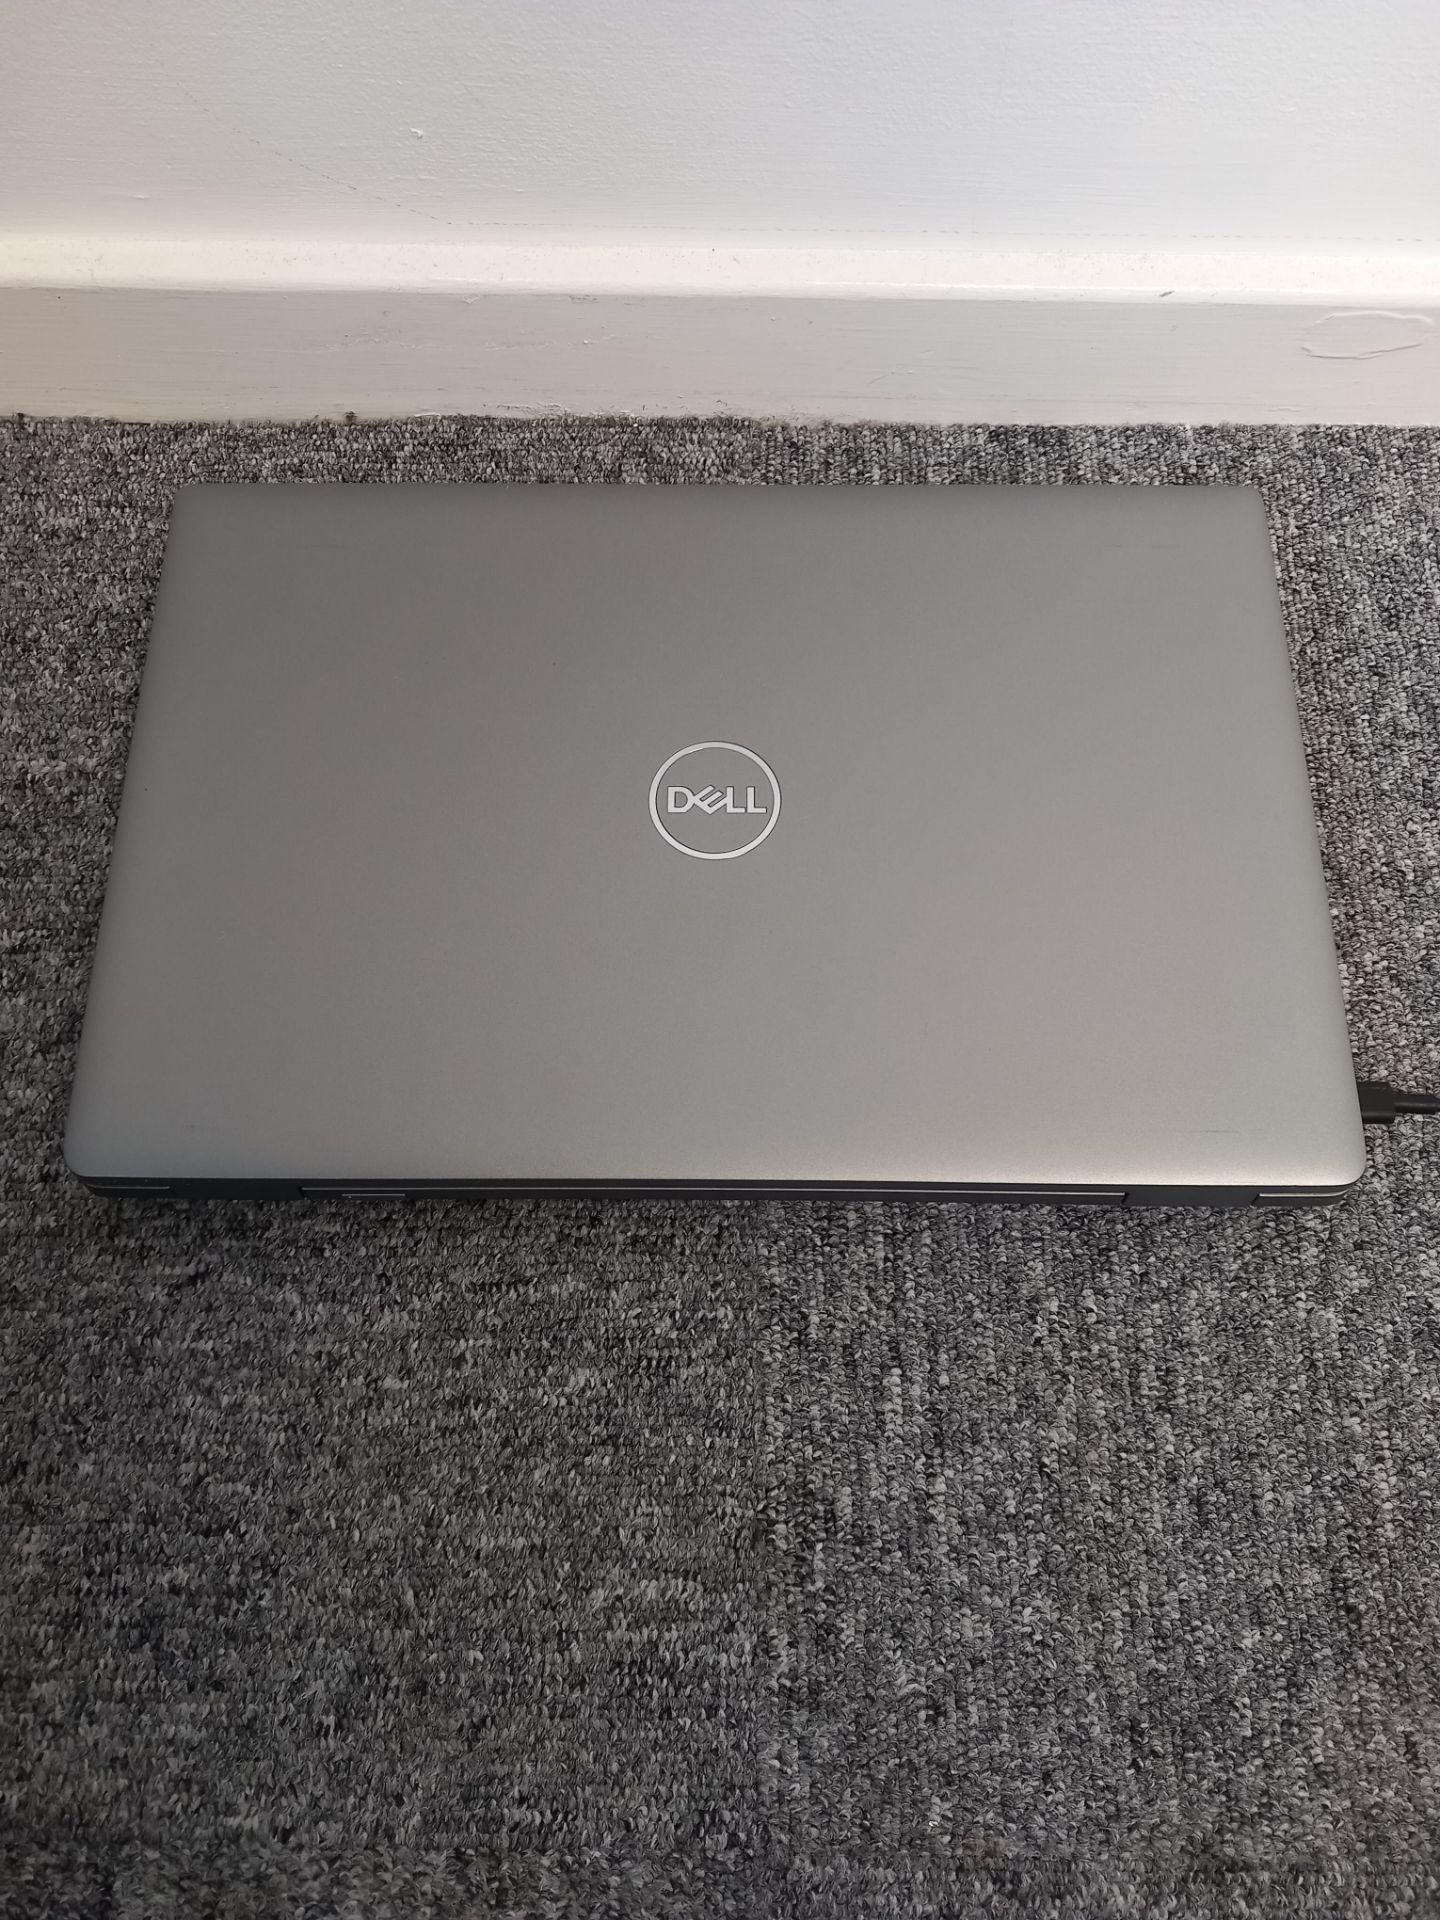 Dell Latitude 5520 Laptop with Charger (Located in Stockport)